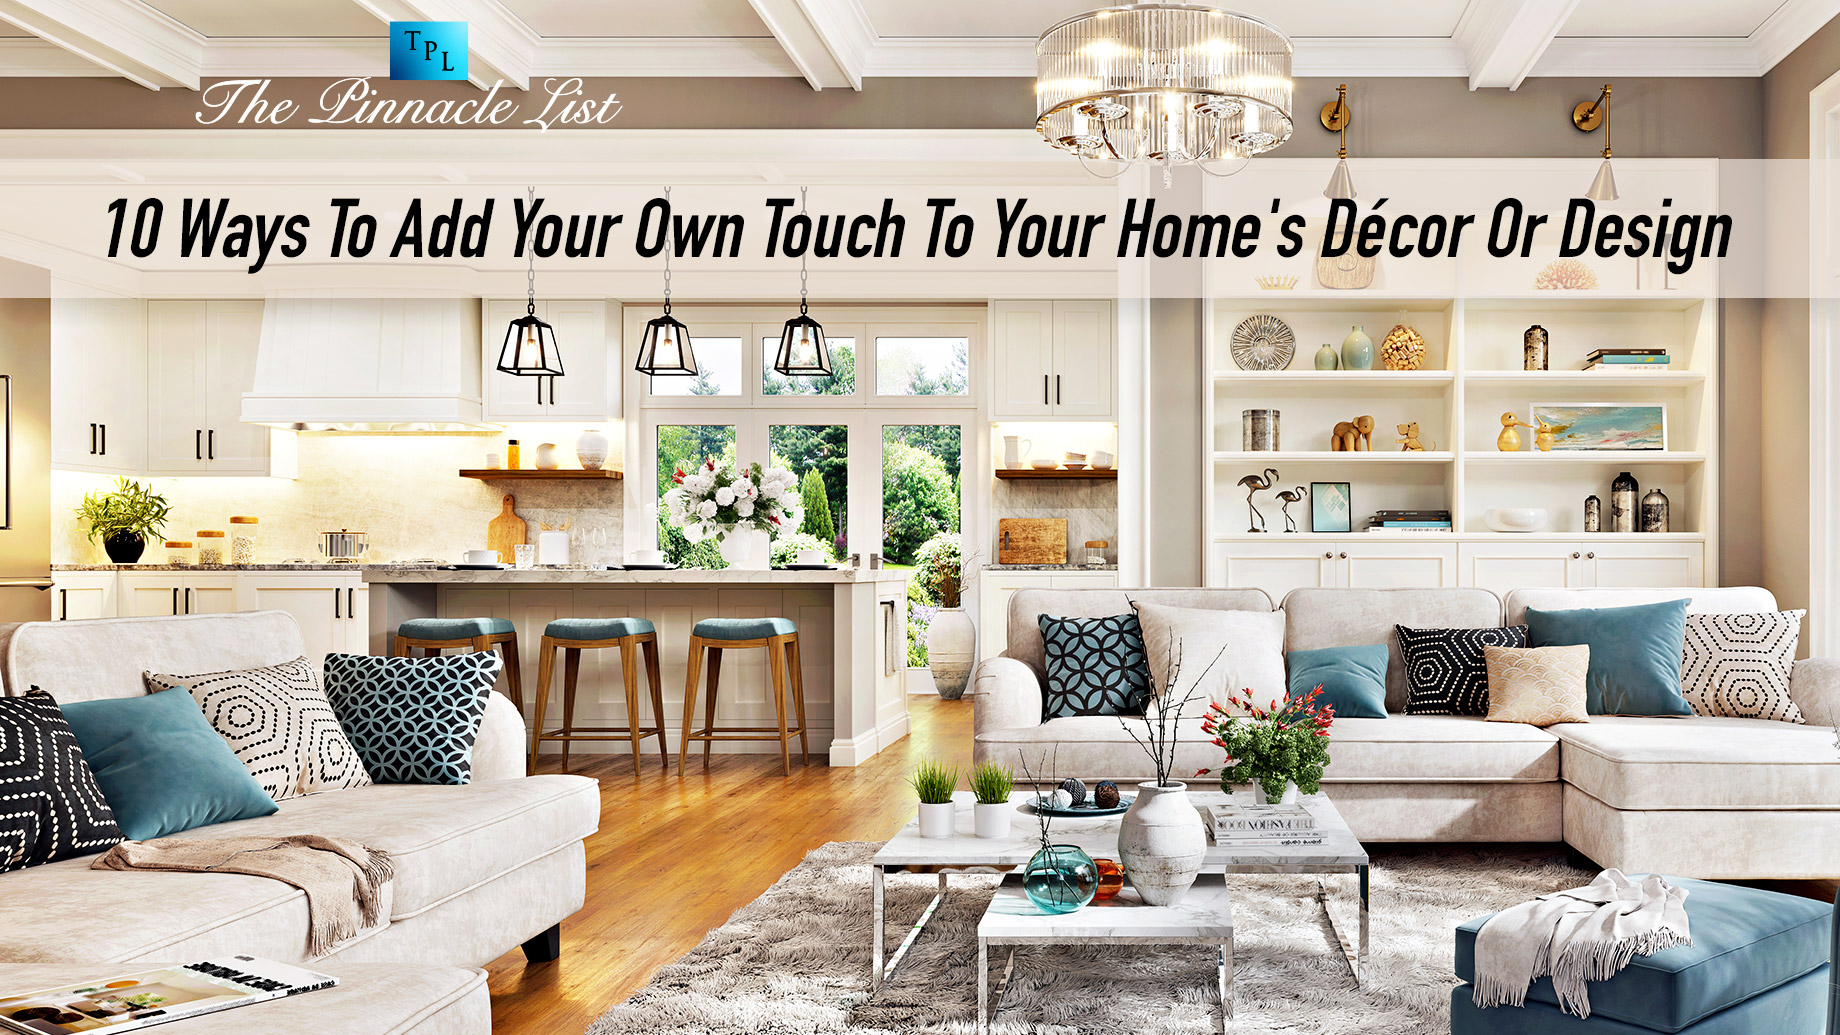 10 Ways To Add Your Own Touch To Your Home's Décor Or Design